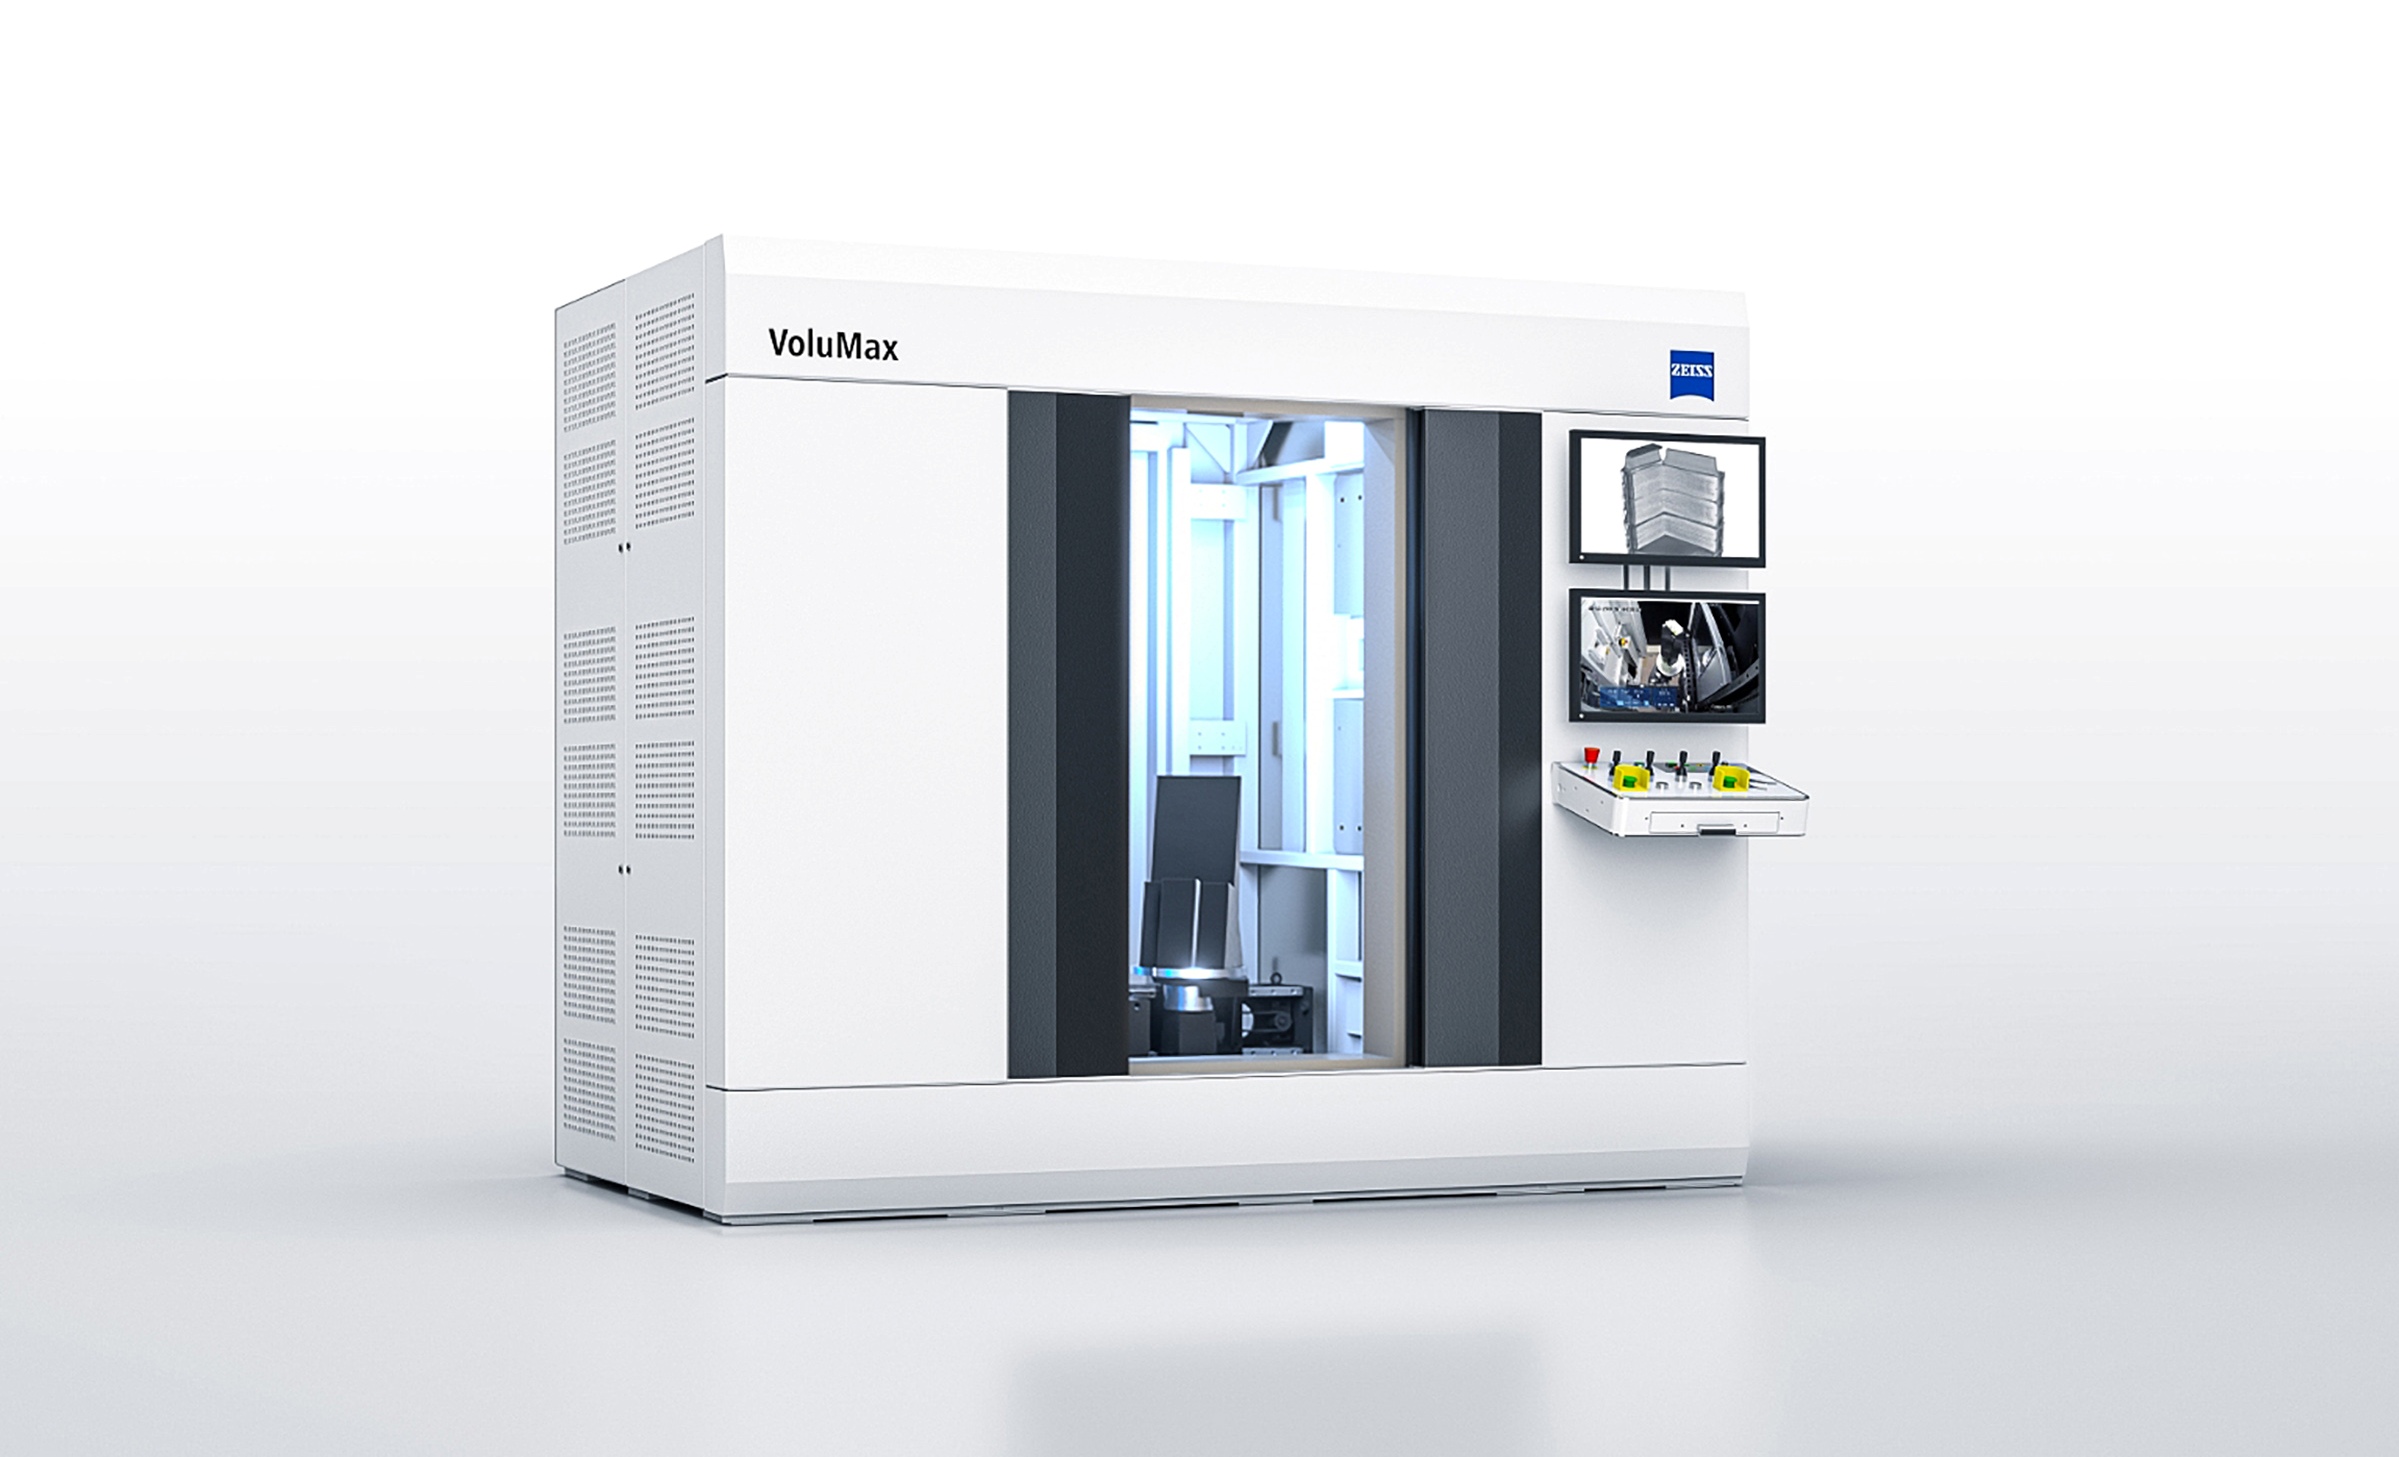 ZEISS VoluMax 9 titan is a compact scanner for performing high density material inspection